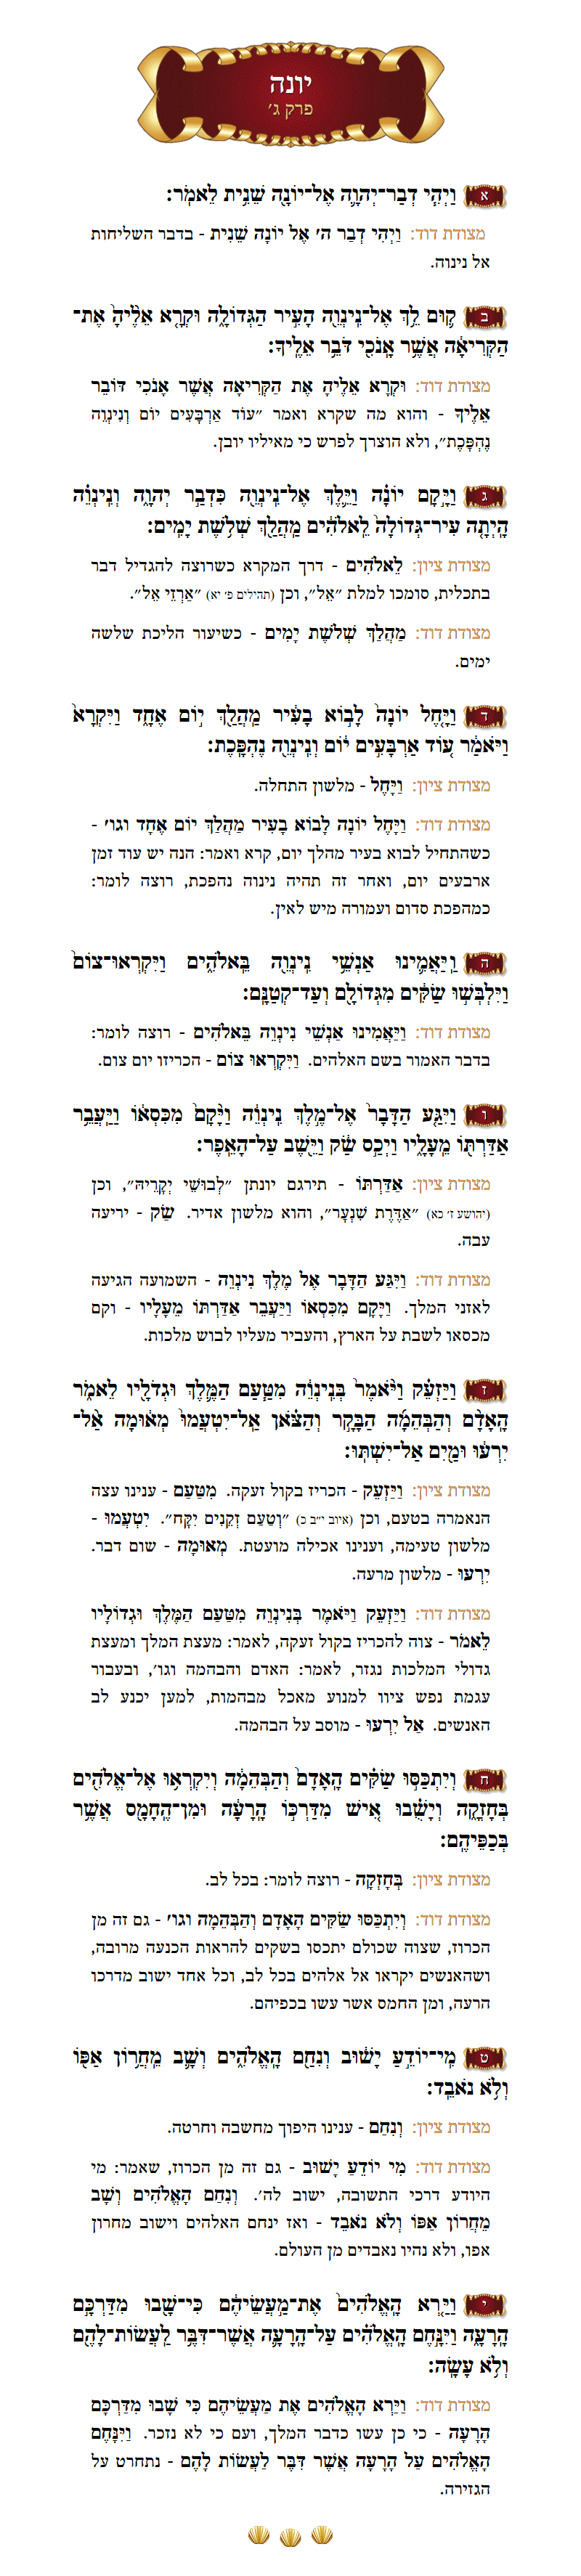 Sefer Yonah Chapter 3 with commentary